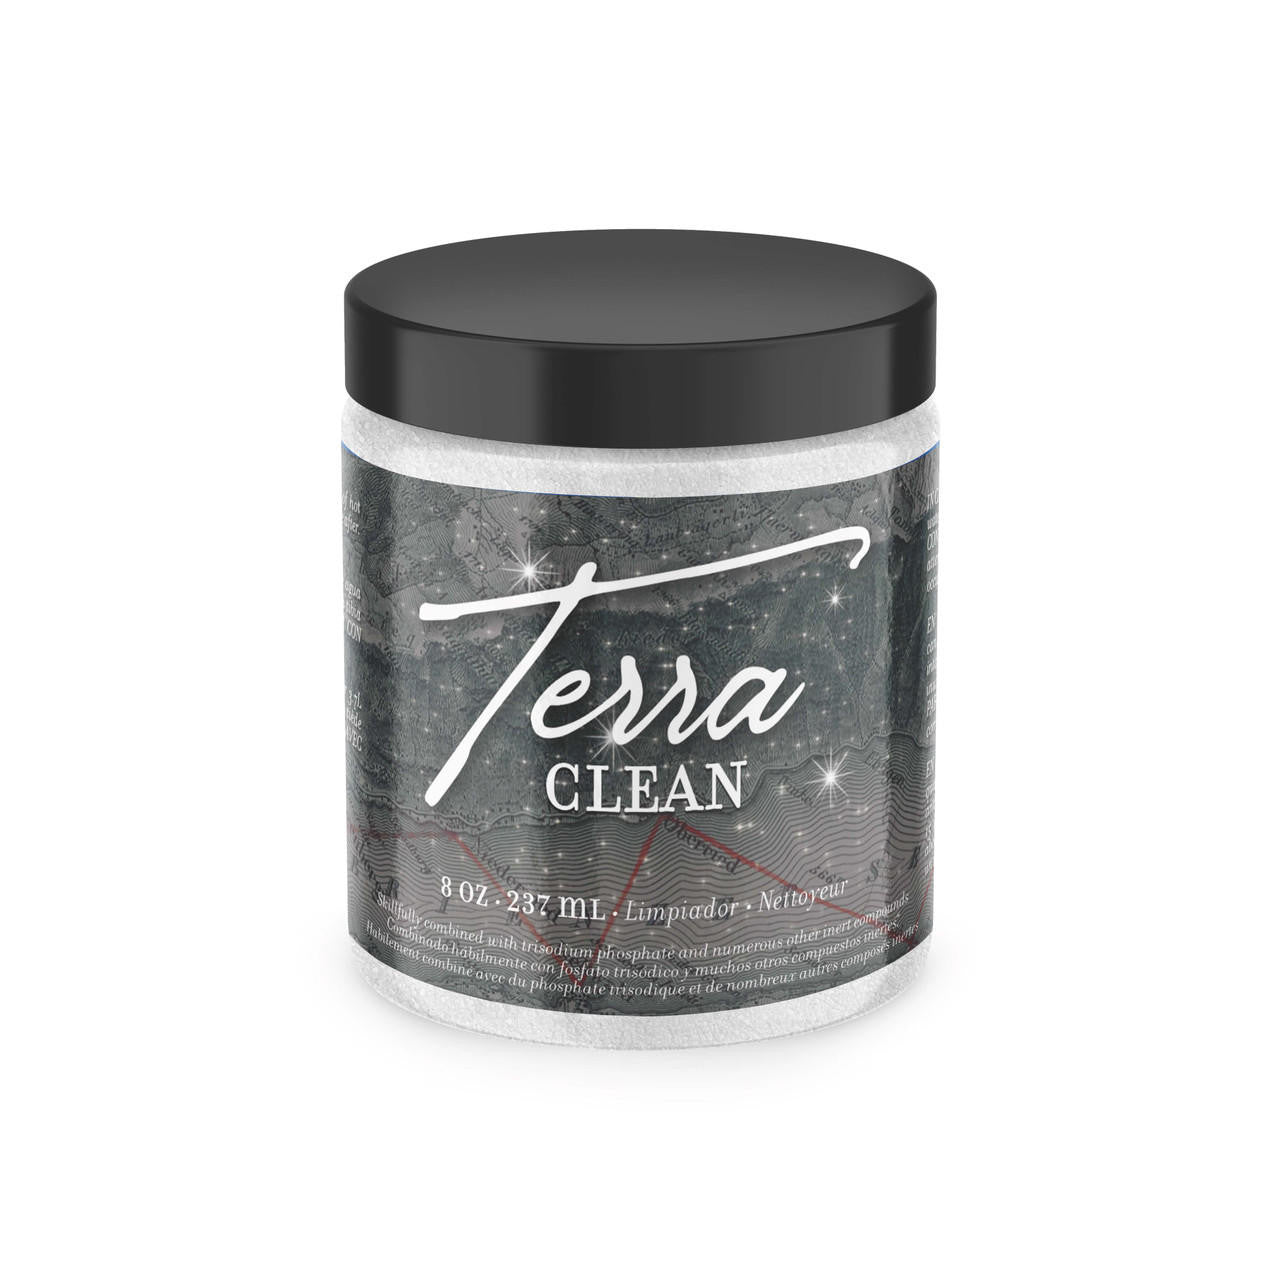 Terra Clean - Same Day Shipping - Furniture deglosser degreaser - Furniture Prep Cleaner - Cleaner for Chalk Paint - Cleaner for Clay Paint - belleandbeau850